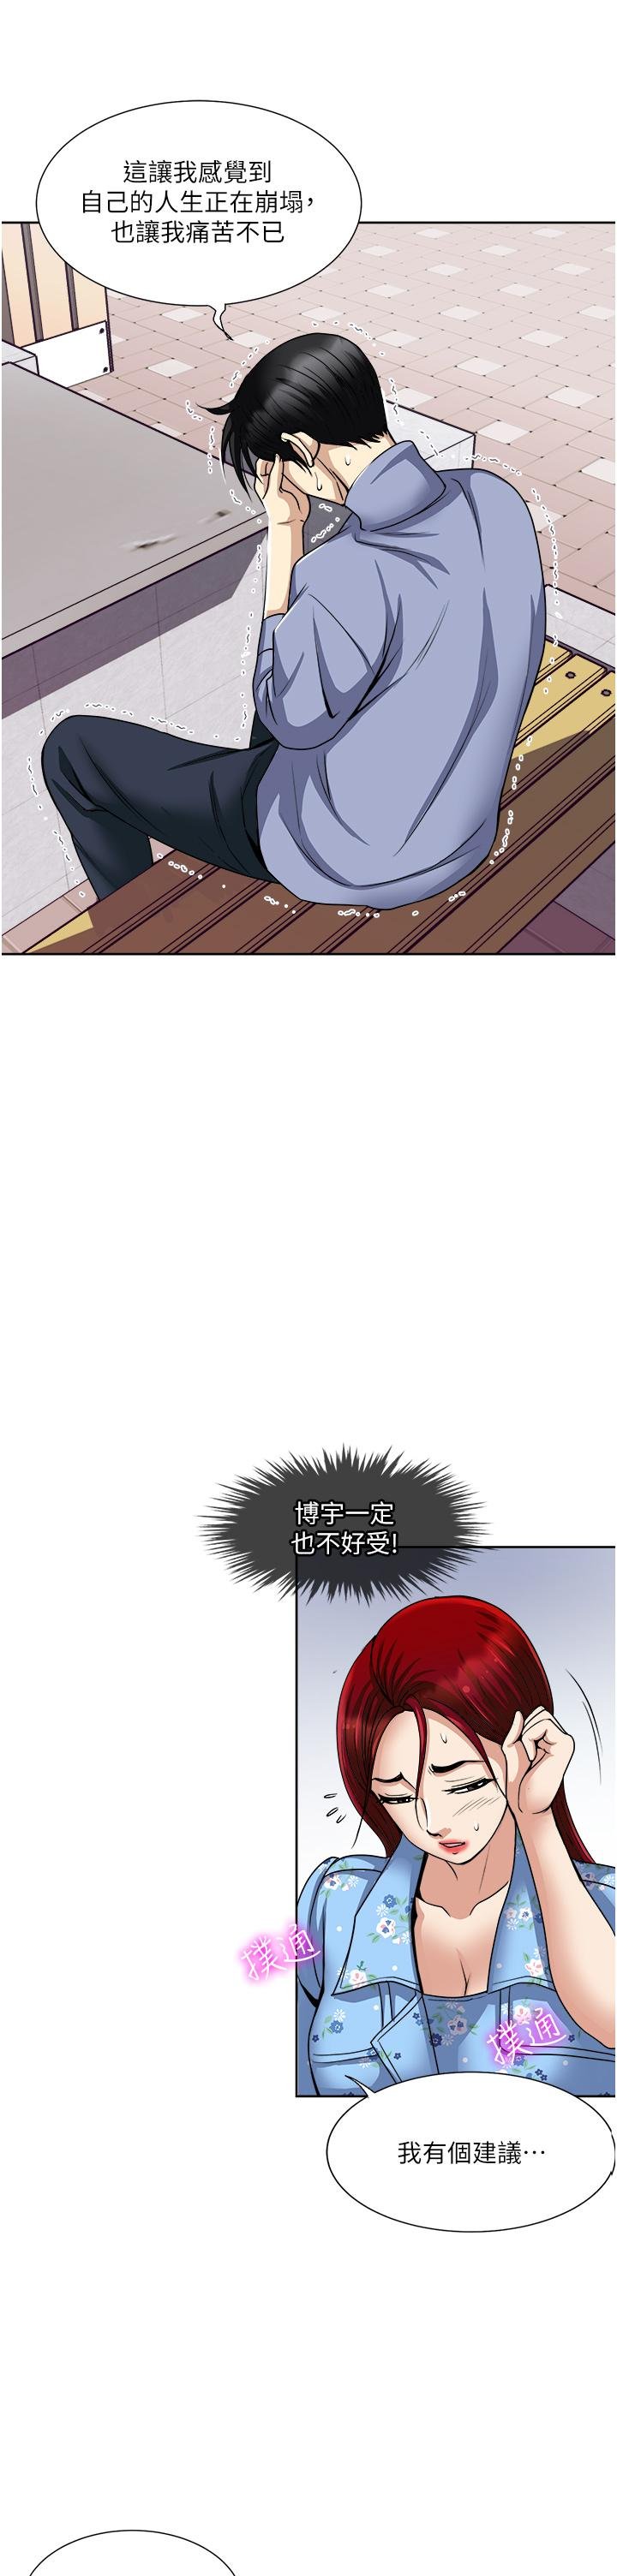 just-once-raw-chap-36-18